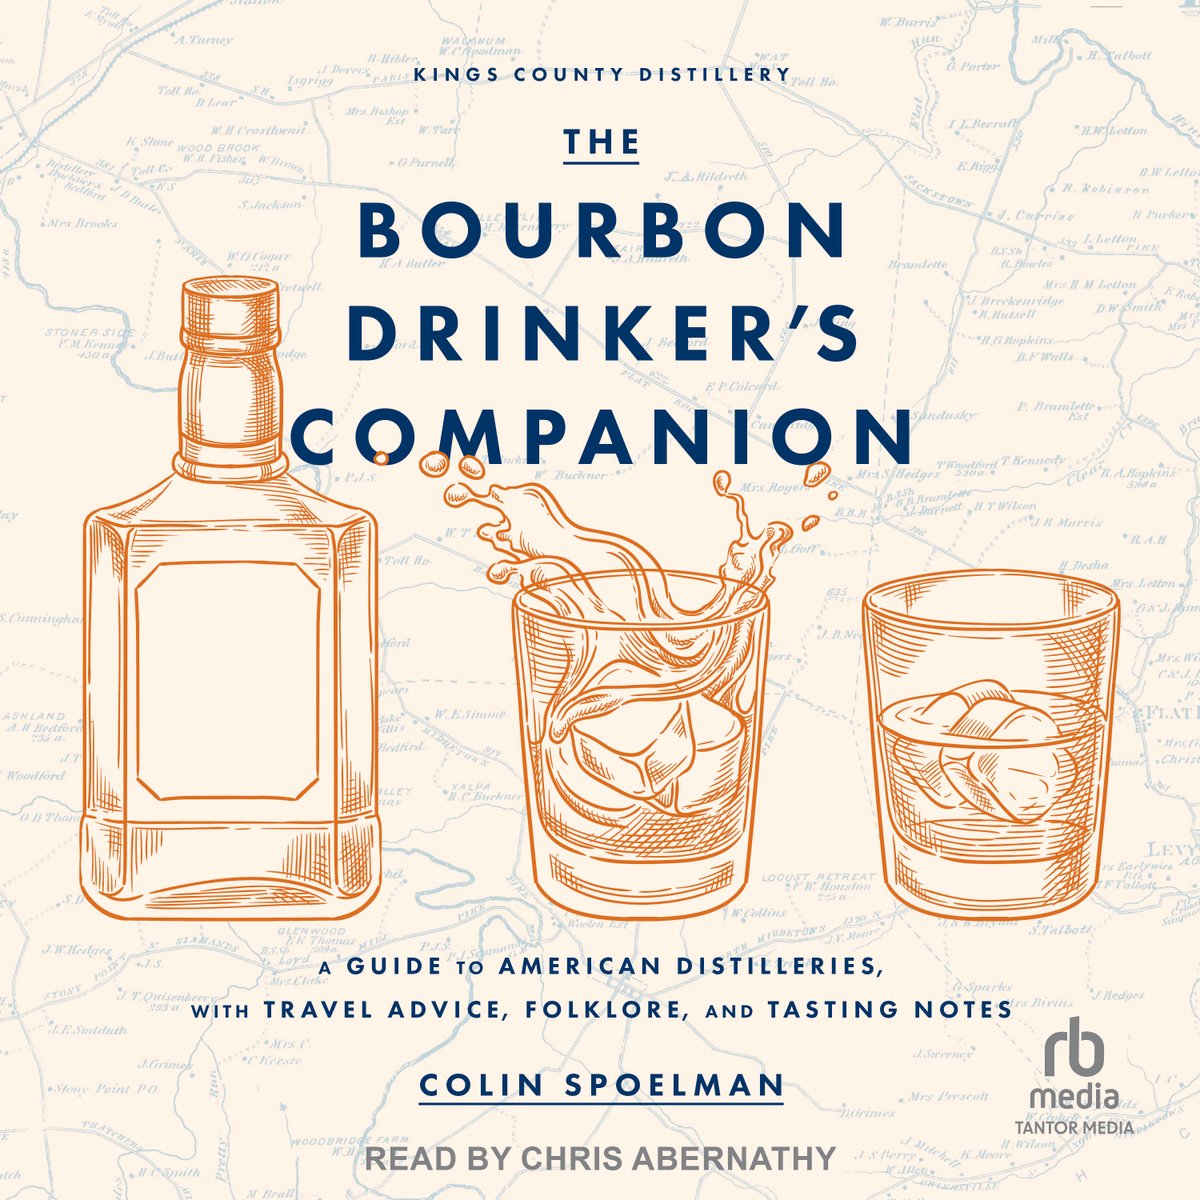 Colorful lore, regional history, and tasting notes for bourbon, whiskey, and rye. 🎧tantor.com/the-bourbon-dr… performed by Chris Abernathy #newrelease #audiobook #bourbon #history #whiskey @spoelmania